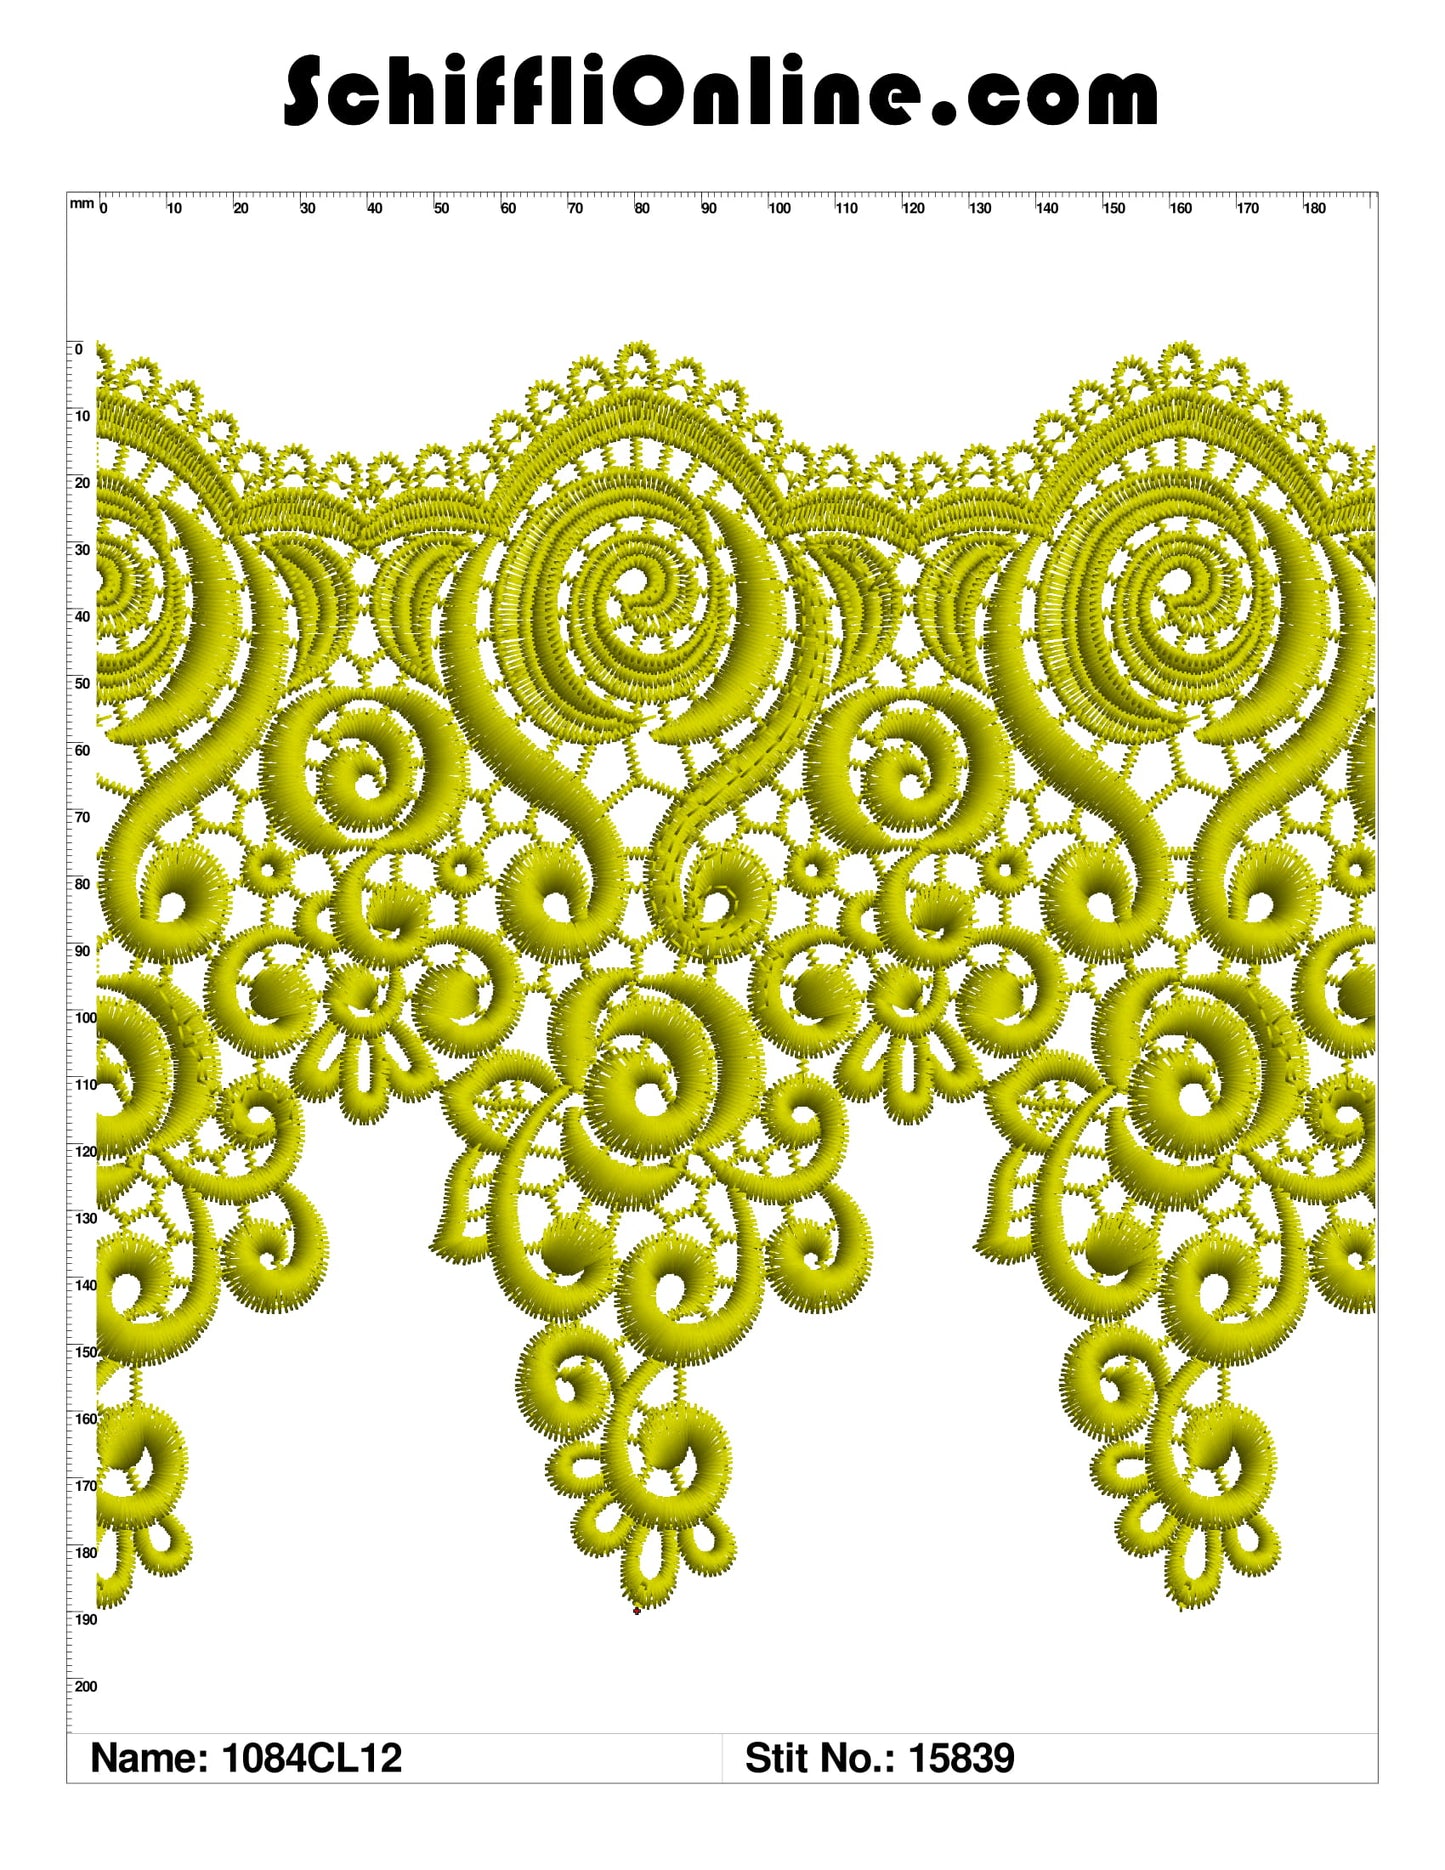 Book 147 CHEMICAL LACE 12X4 50 DESIGNS